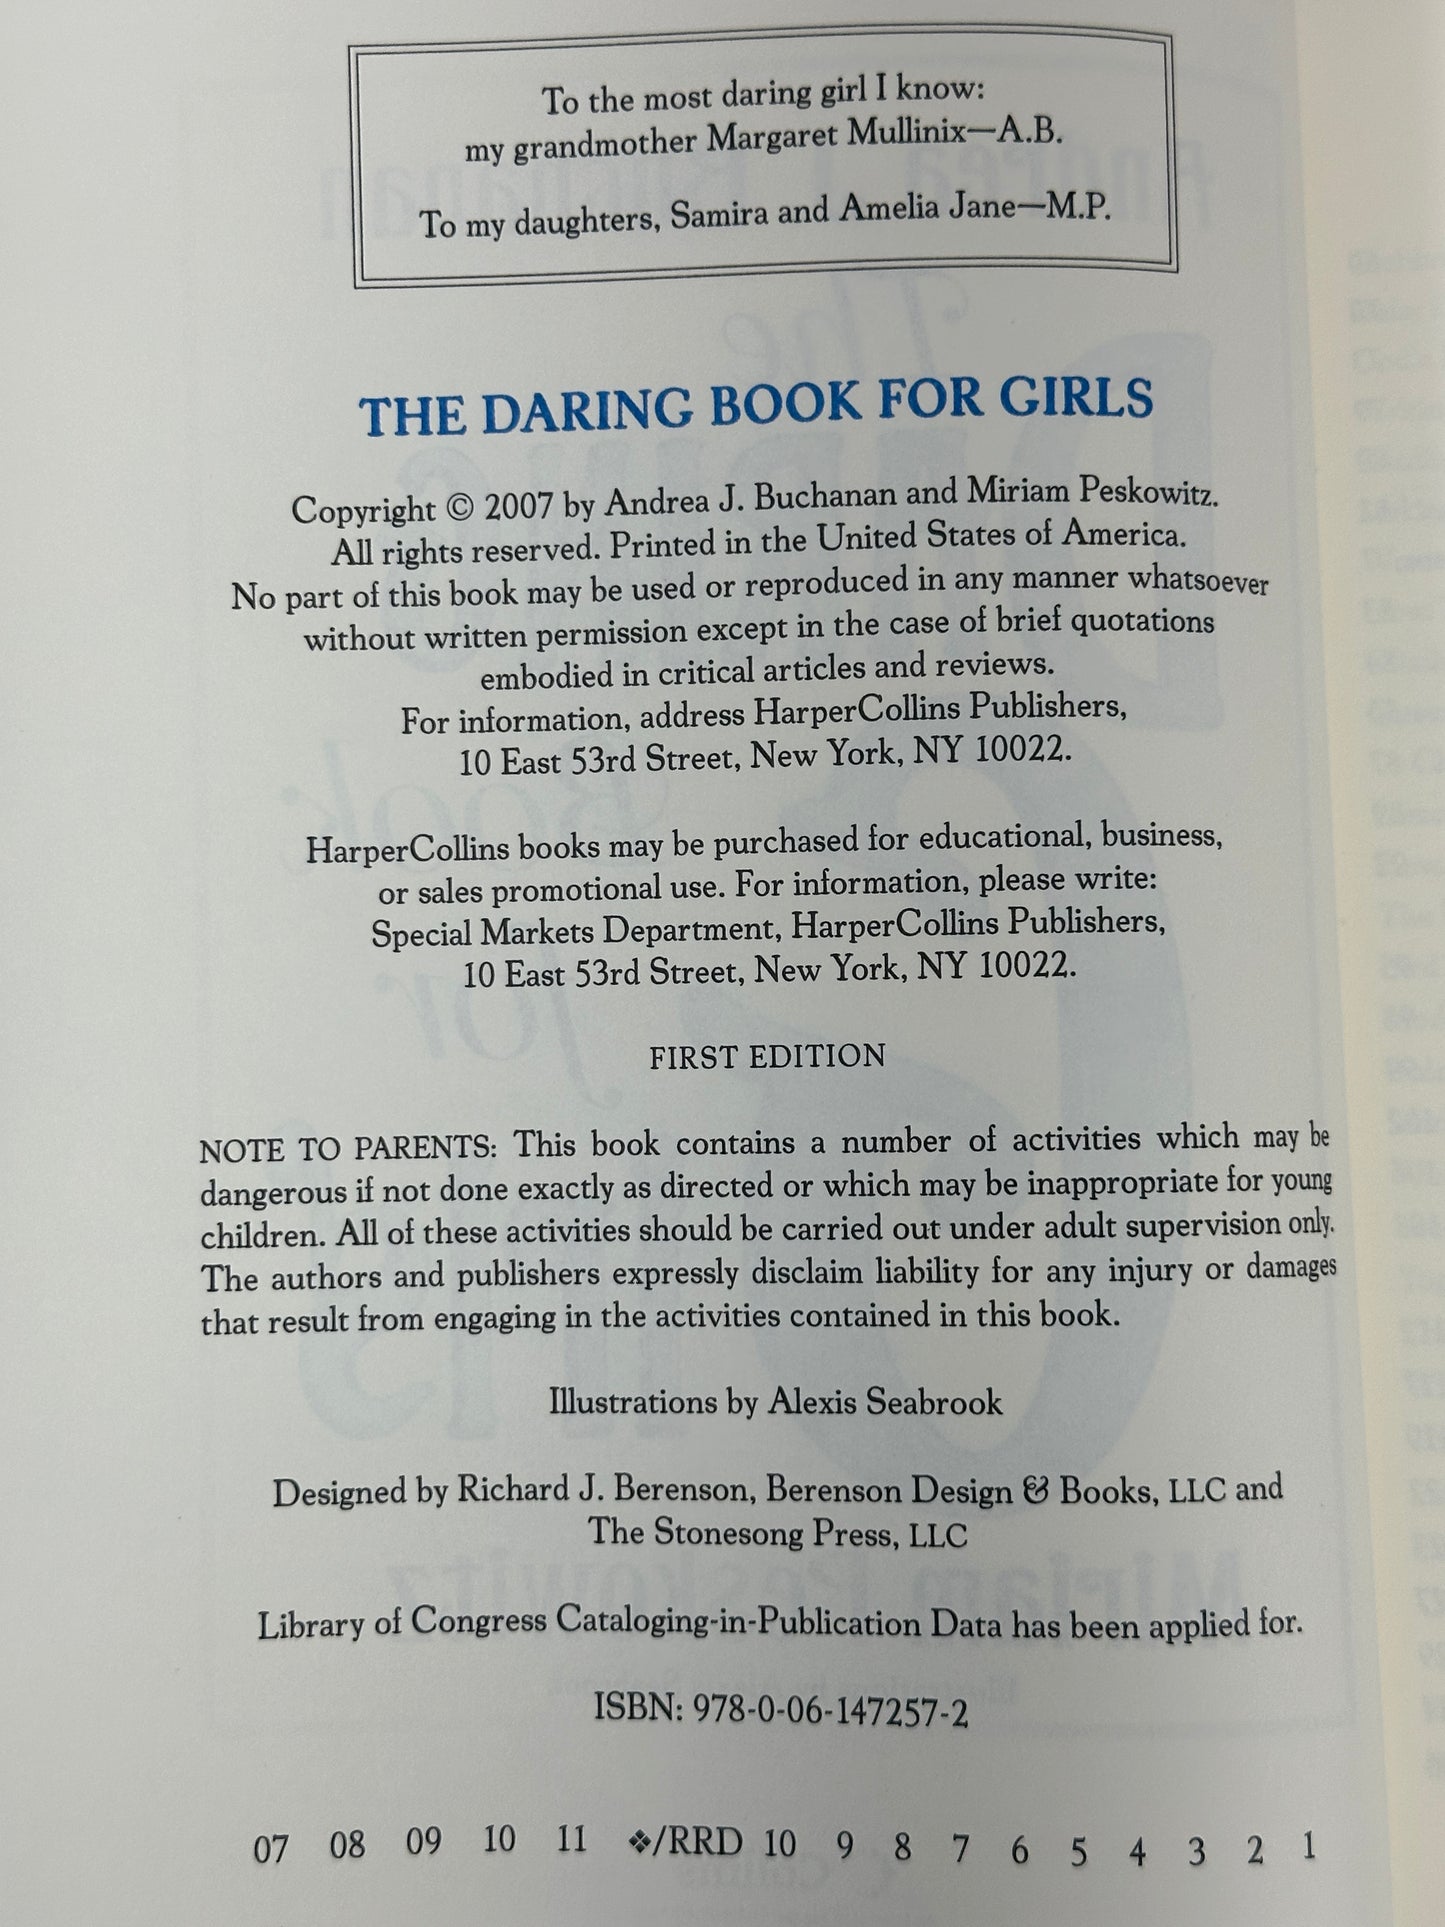 The Darling Book For Girls by Miriam Peskowitz [2007]